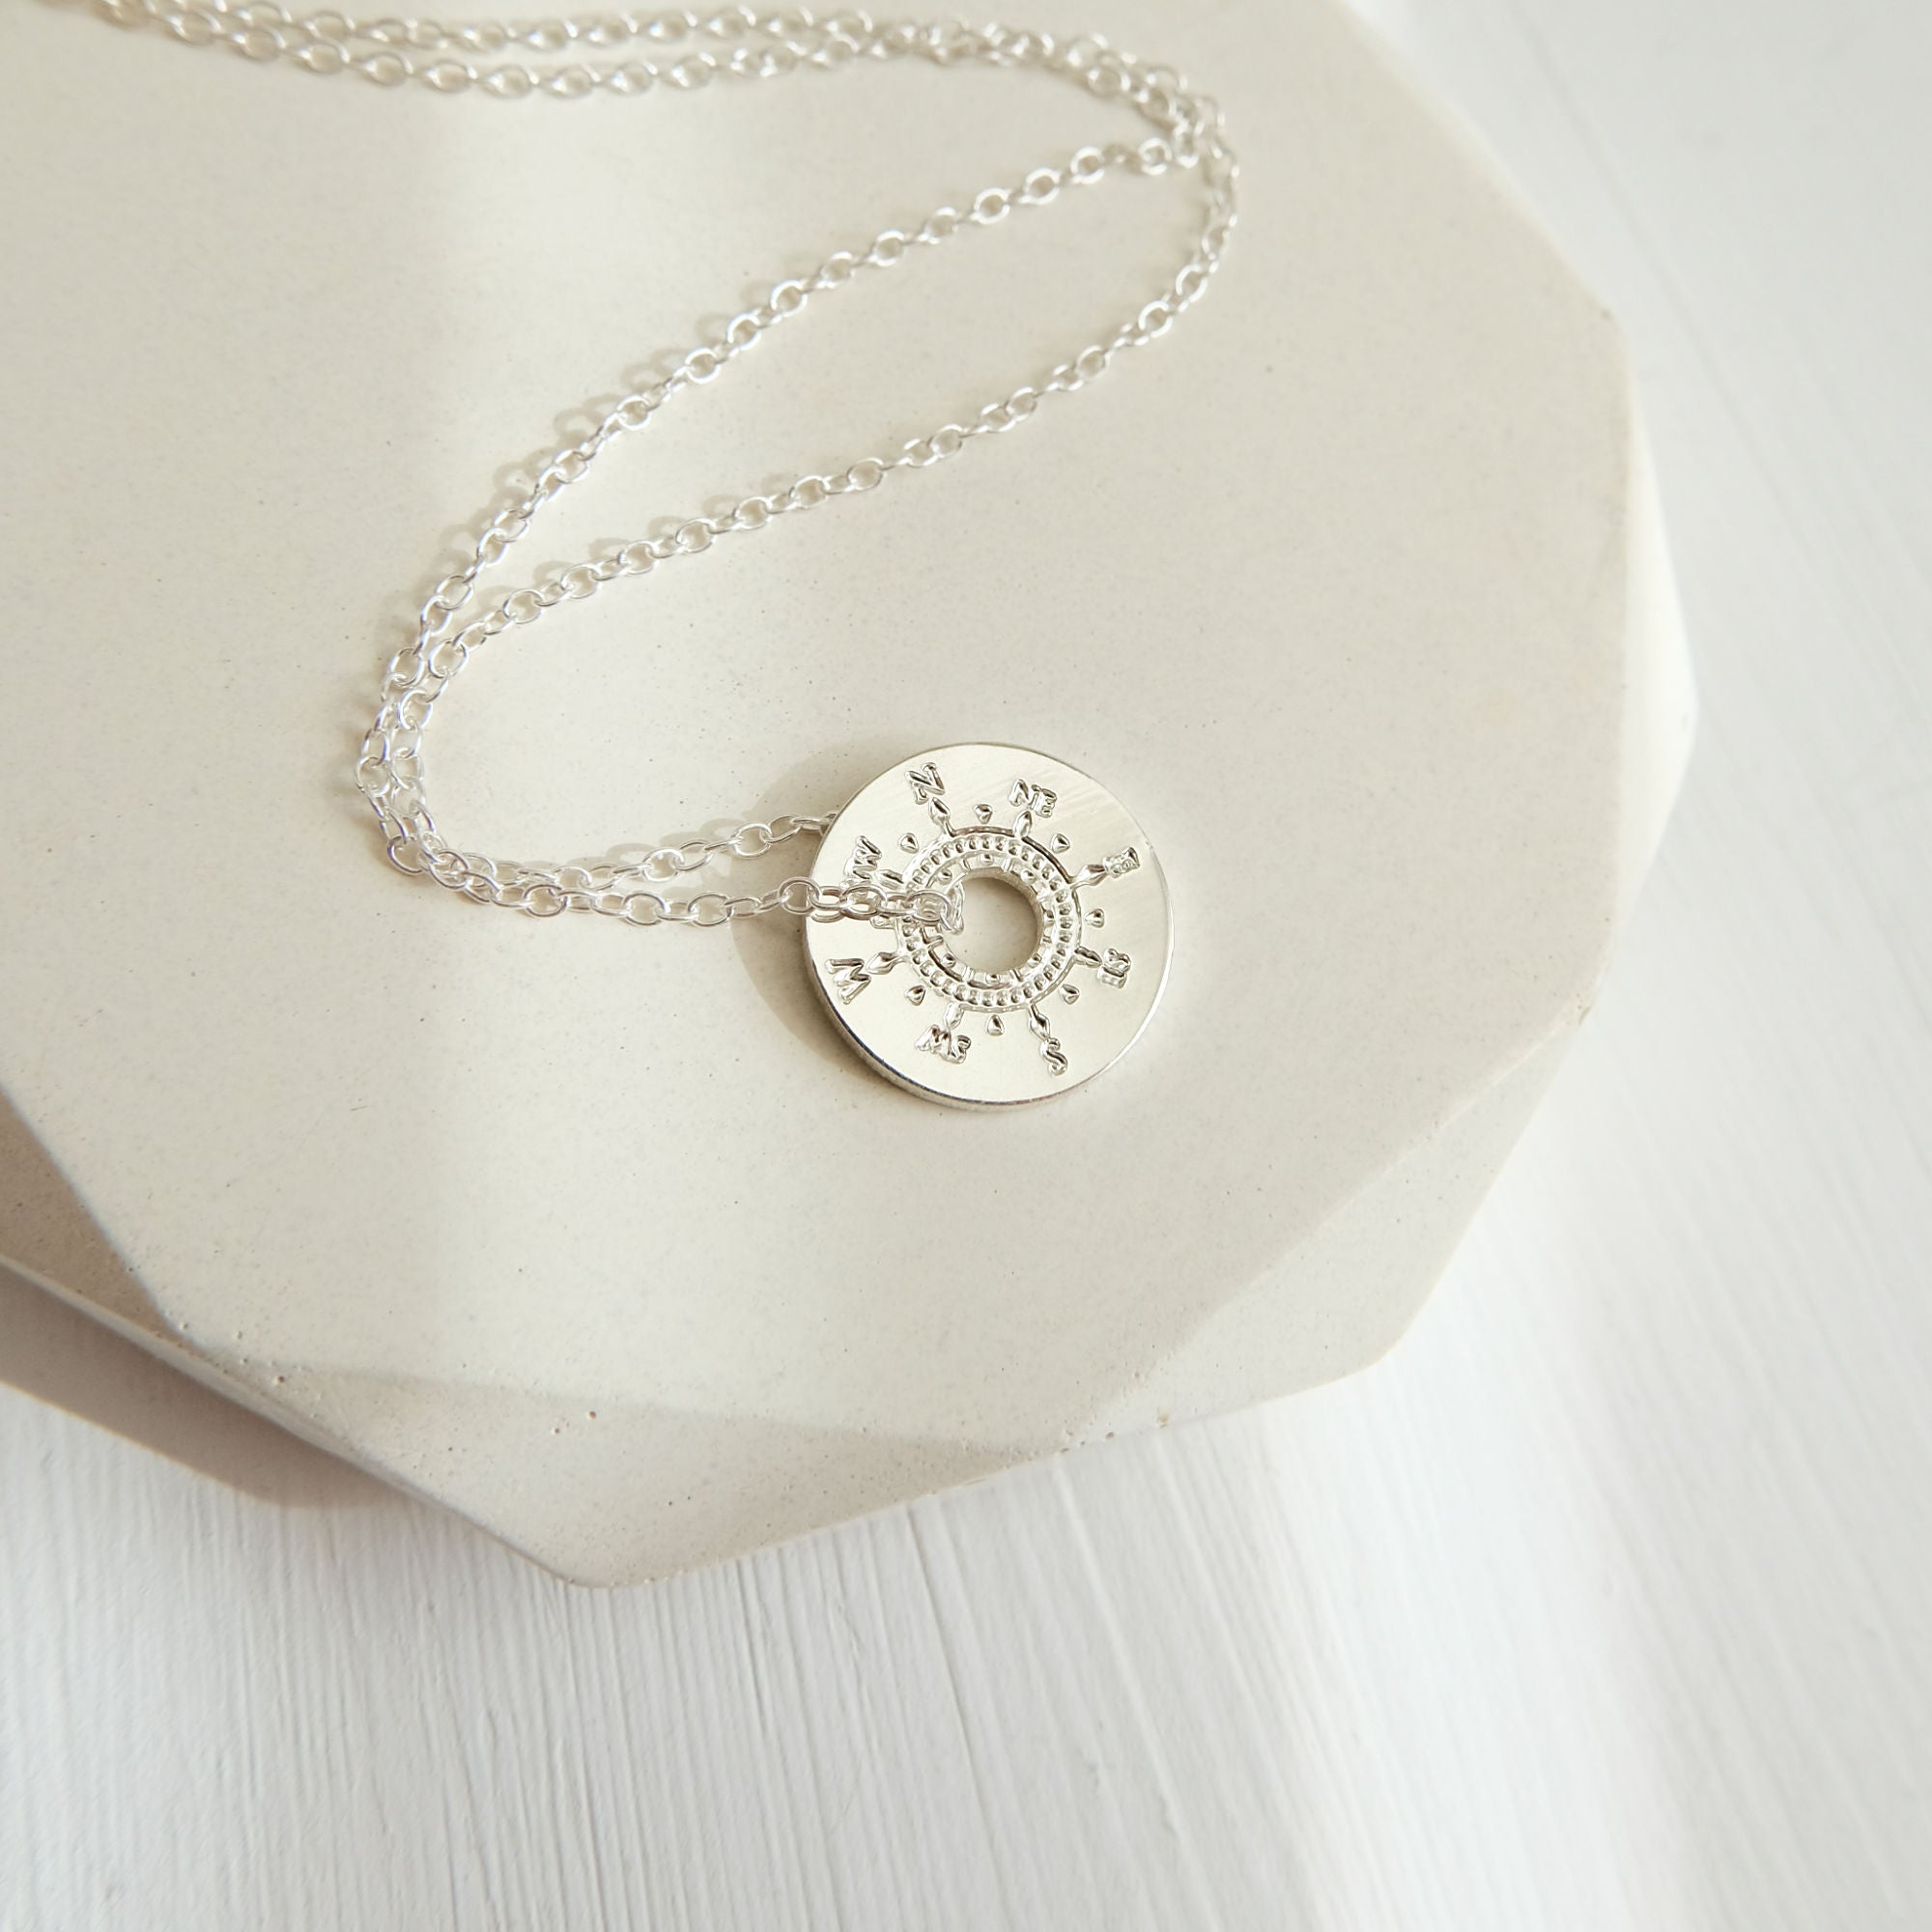 Compass Medallion Necklace - Coordinates Necklace for Her - Talisa -  Personalised gifts for her